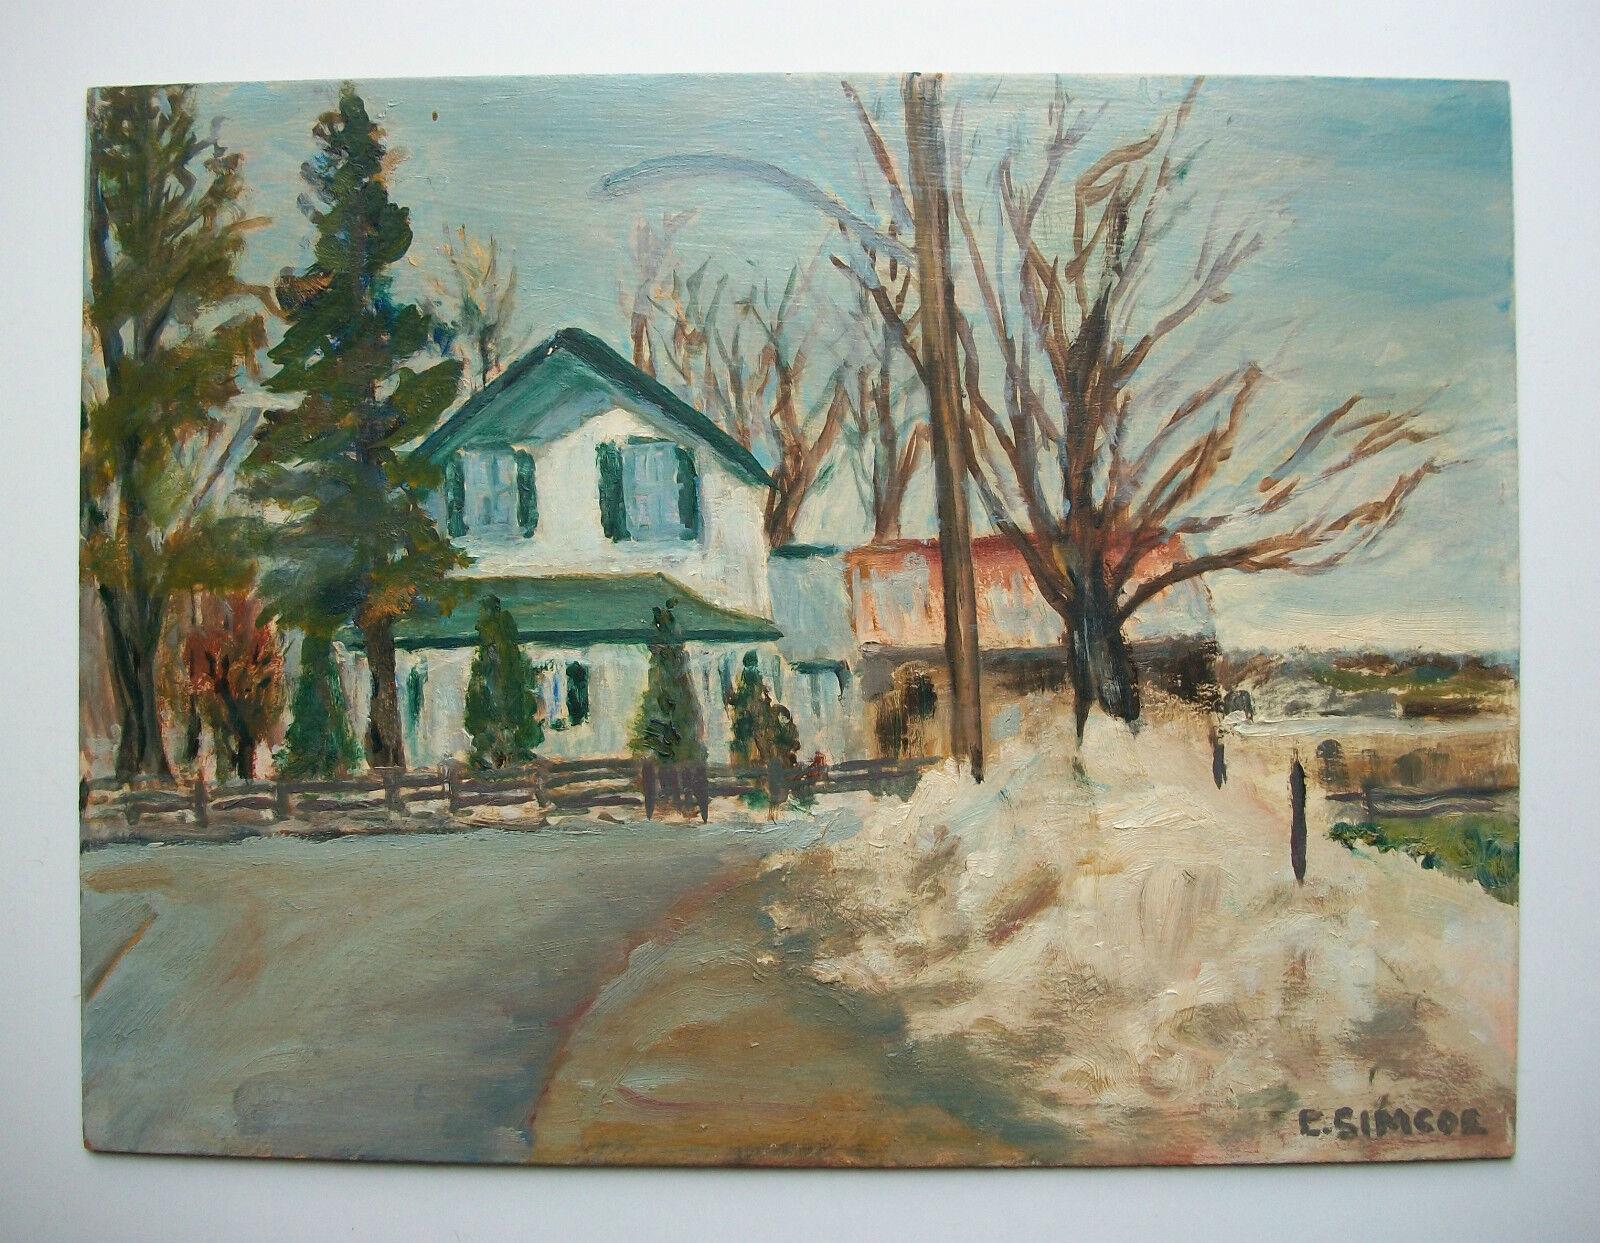 Hand-Painted E. SIMCOE - Vintage Oil Painting on Panel - Unframed - Canada - Mid 20th Century For Sale